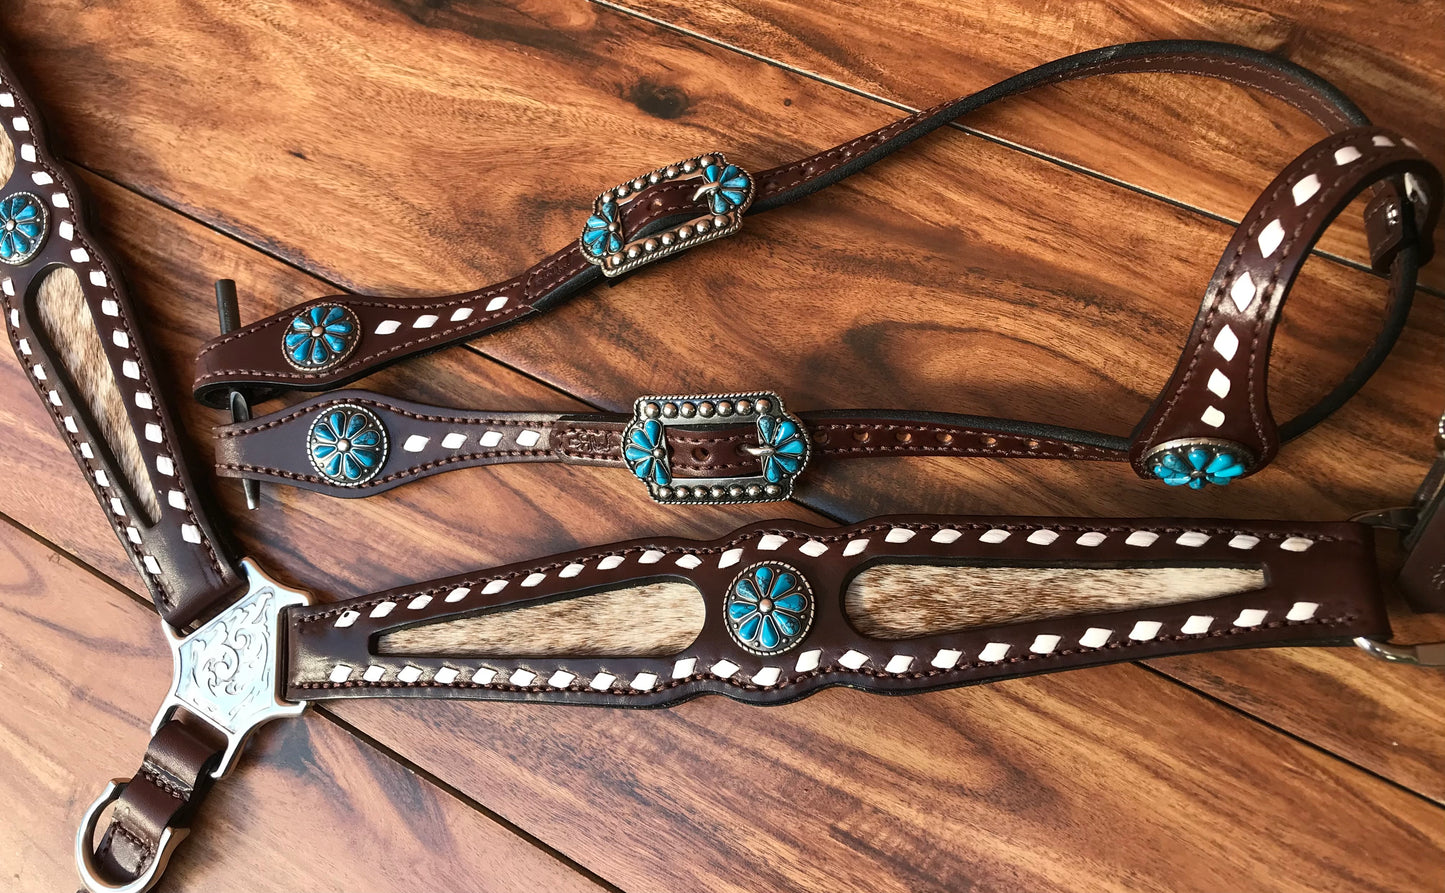 Buckstitch cowhide with turquoise flower